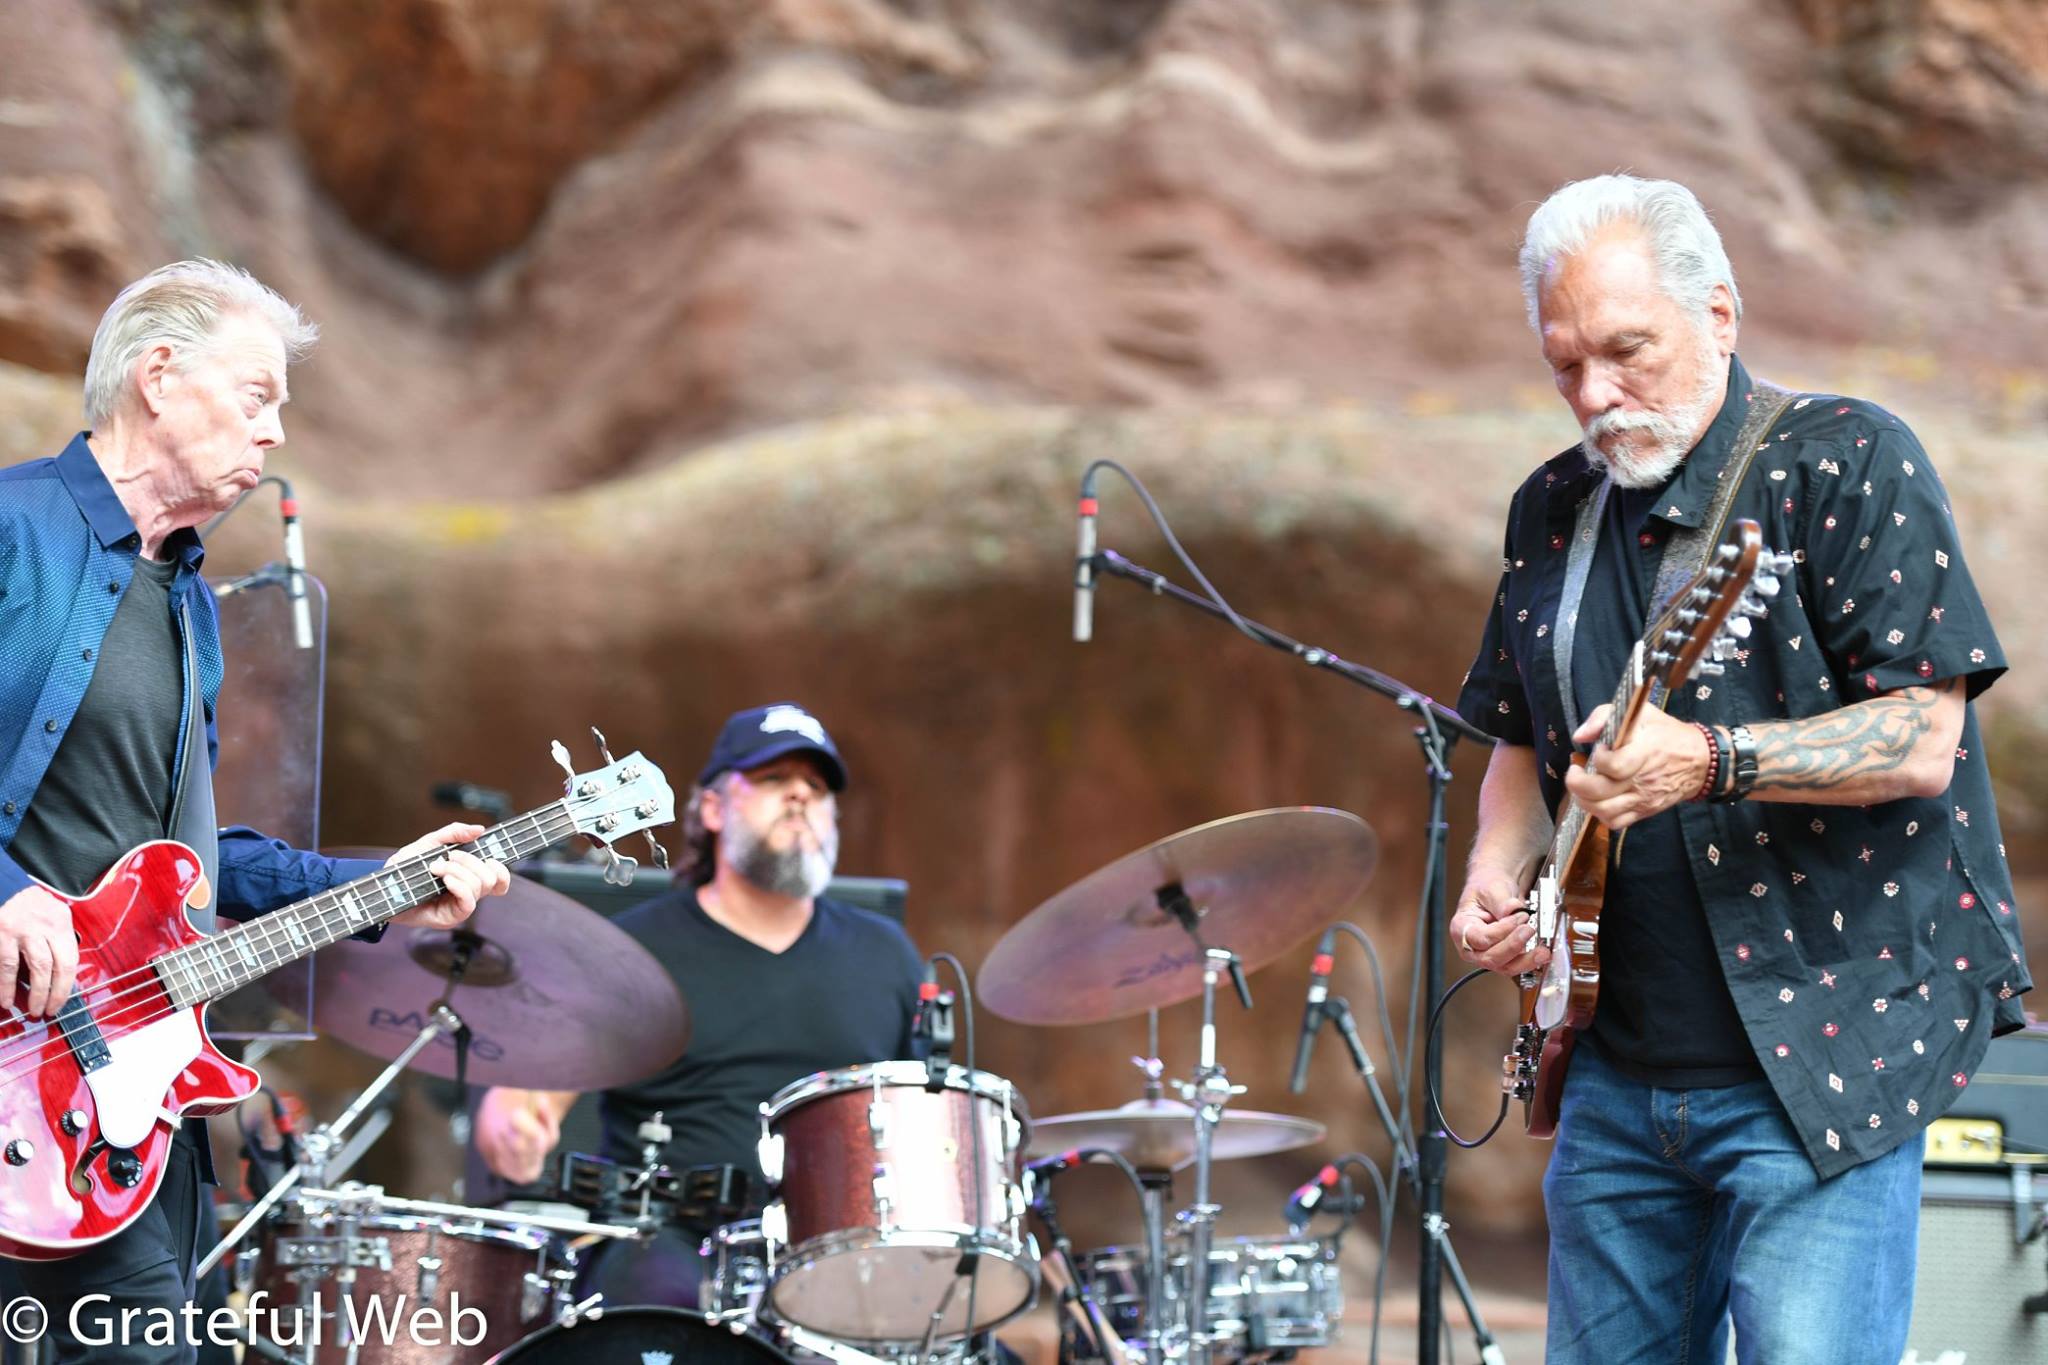 Hot Tuna will open up at Red Rocks this year!